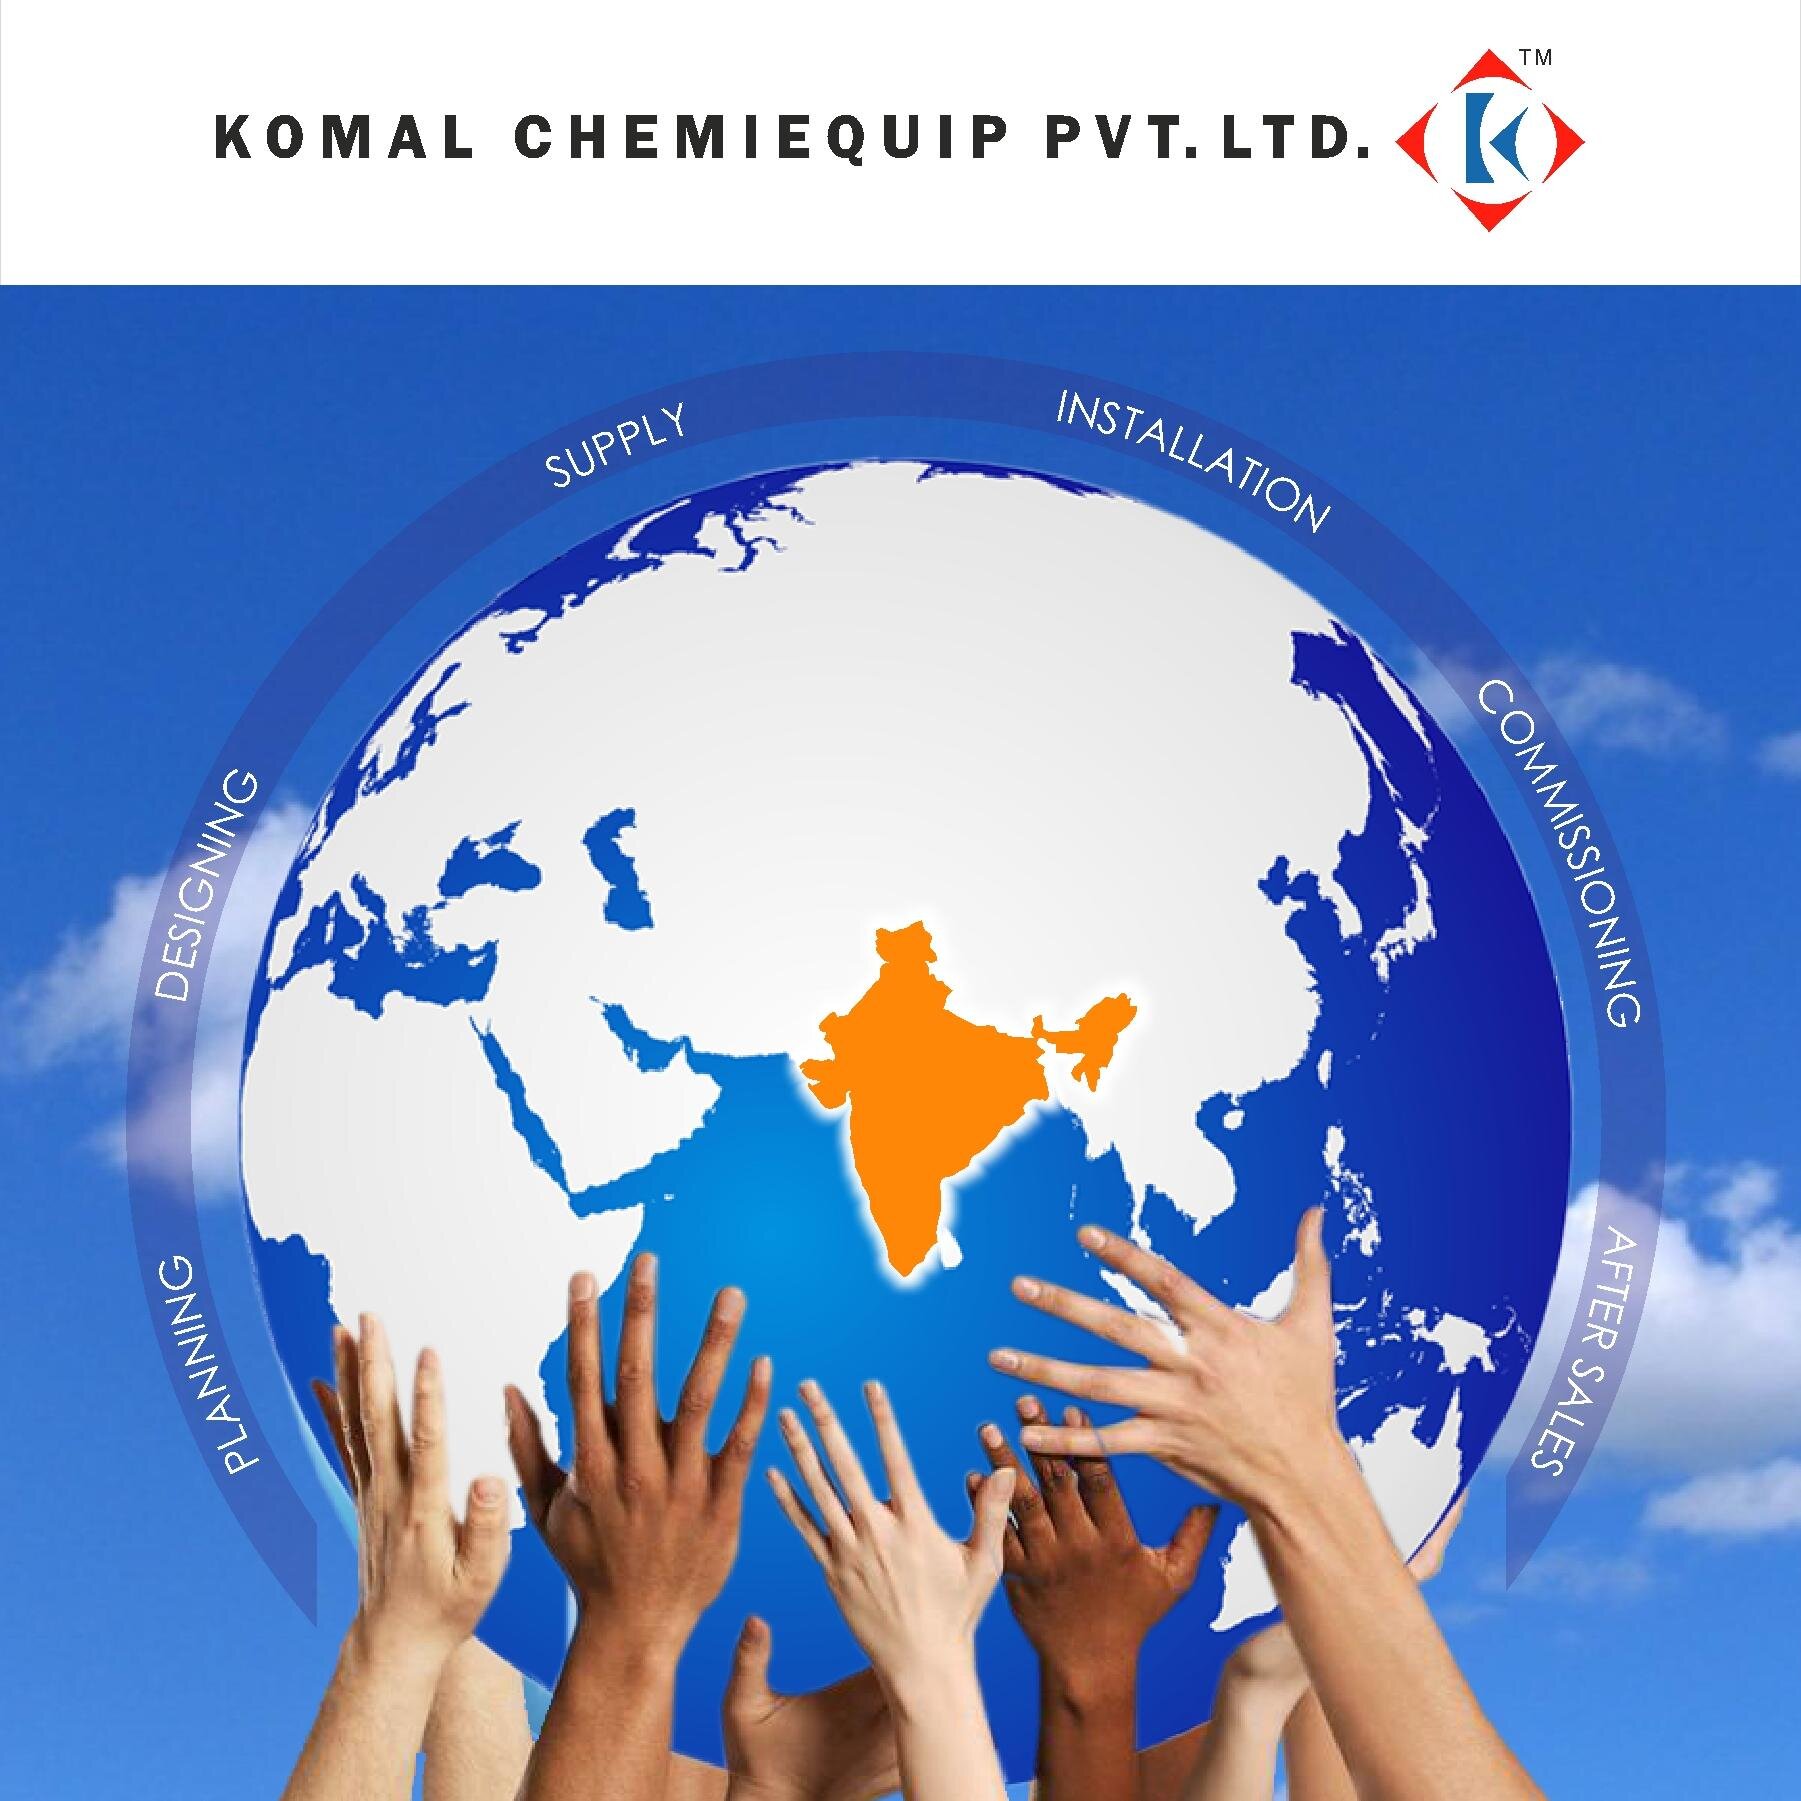 Komal Chemiequip P Ltd., with a legacy of 38 years, are one of the leading manufacturers of Automatic Plants & Equipments for Plating and Surface Finishing.